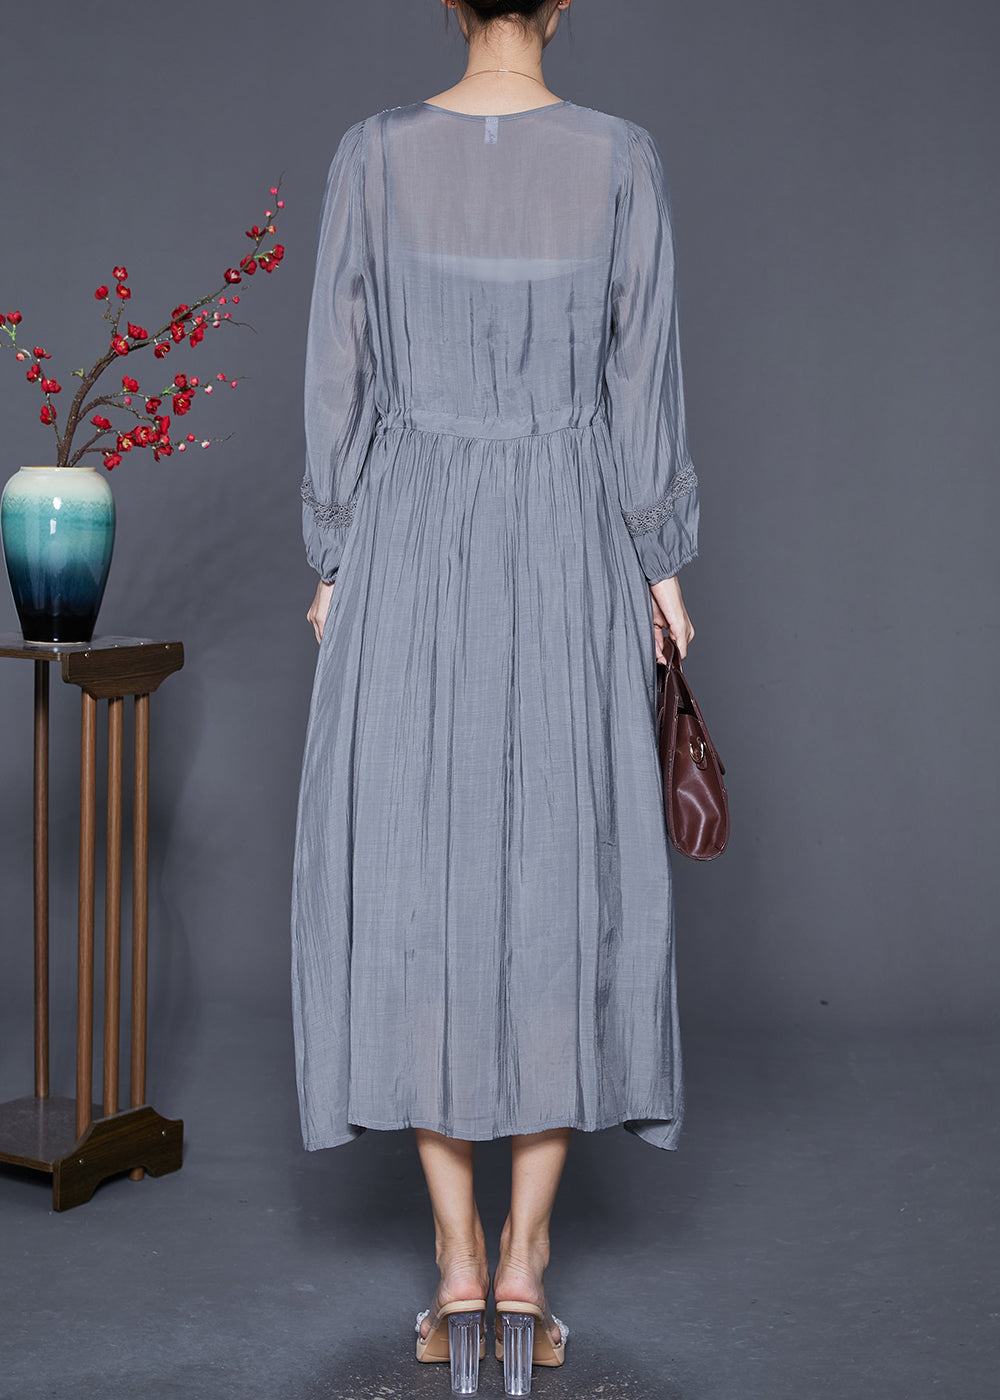 Natural Grey Embroideried Cinched Patchwork Cotton Dresses Summer Ada Fashion